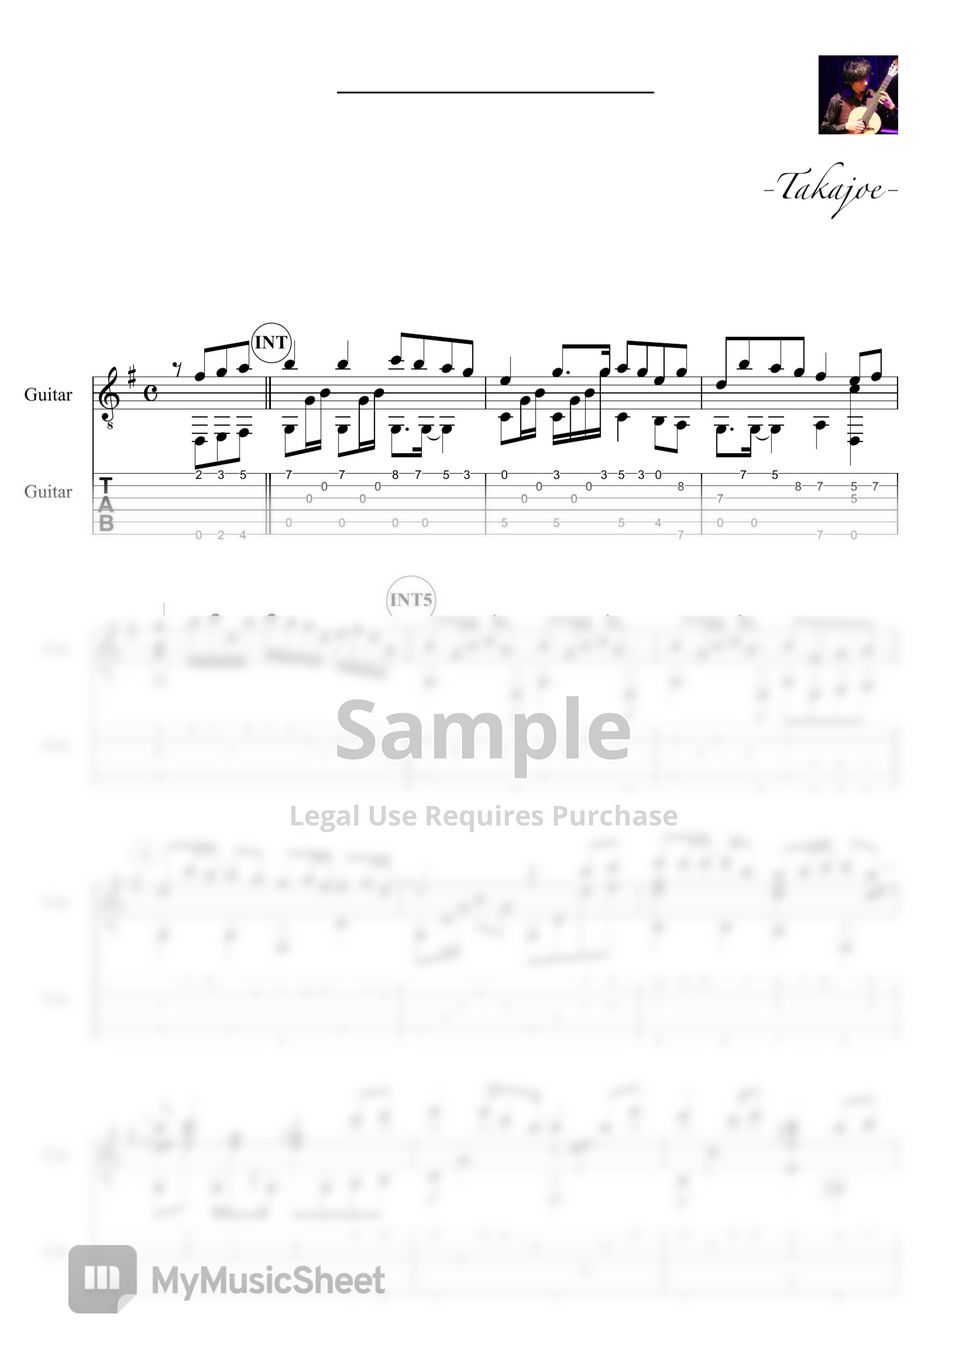 CARPENTERS on GUITAR - CARPENTERS Collection (6 Songs) Sheet by